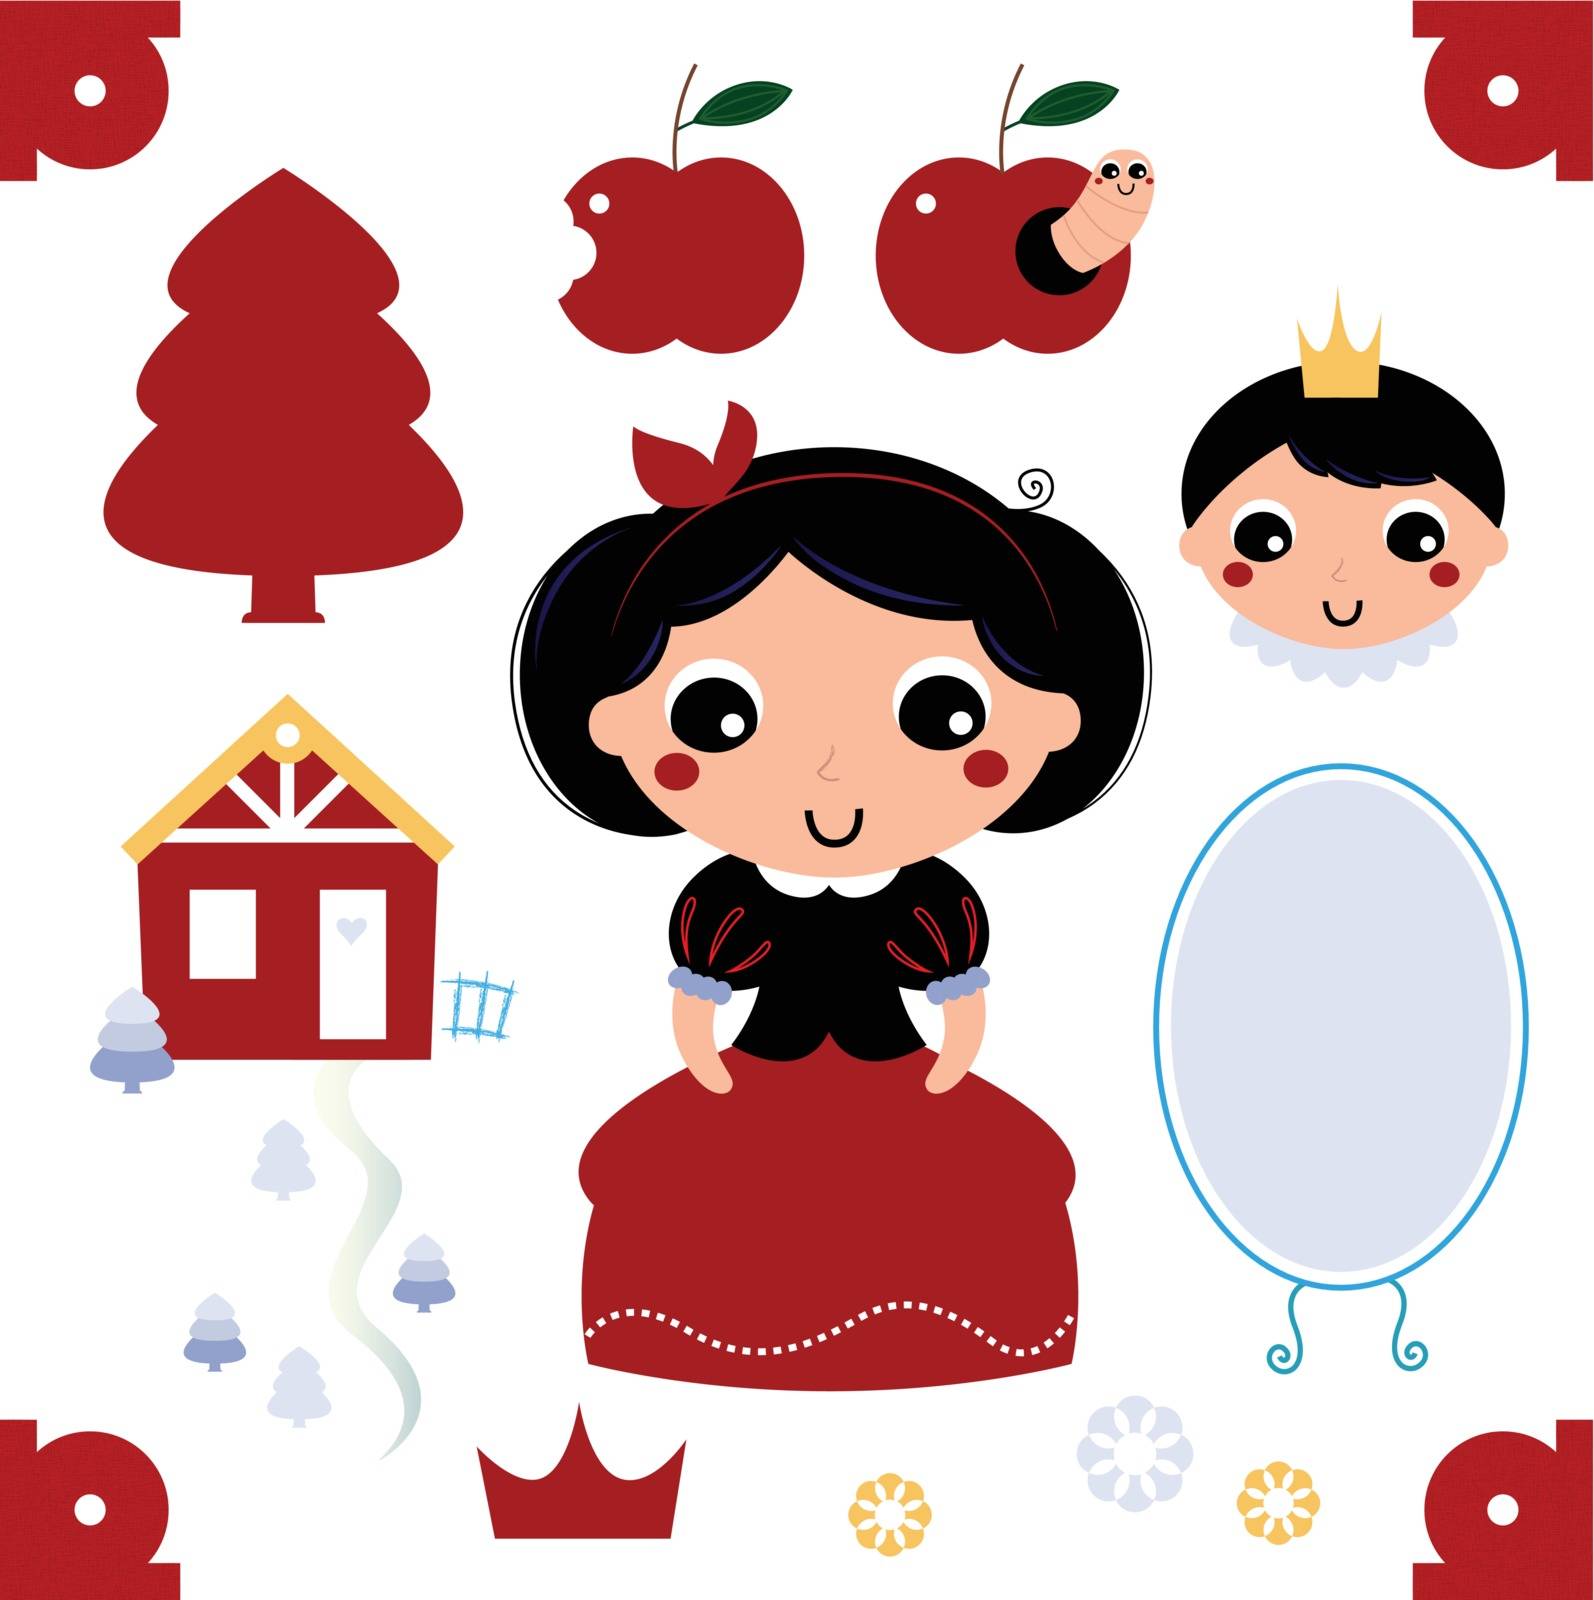 Cute snow white illustration collection isolated on white by Lordalea